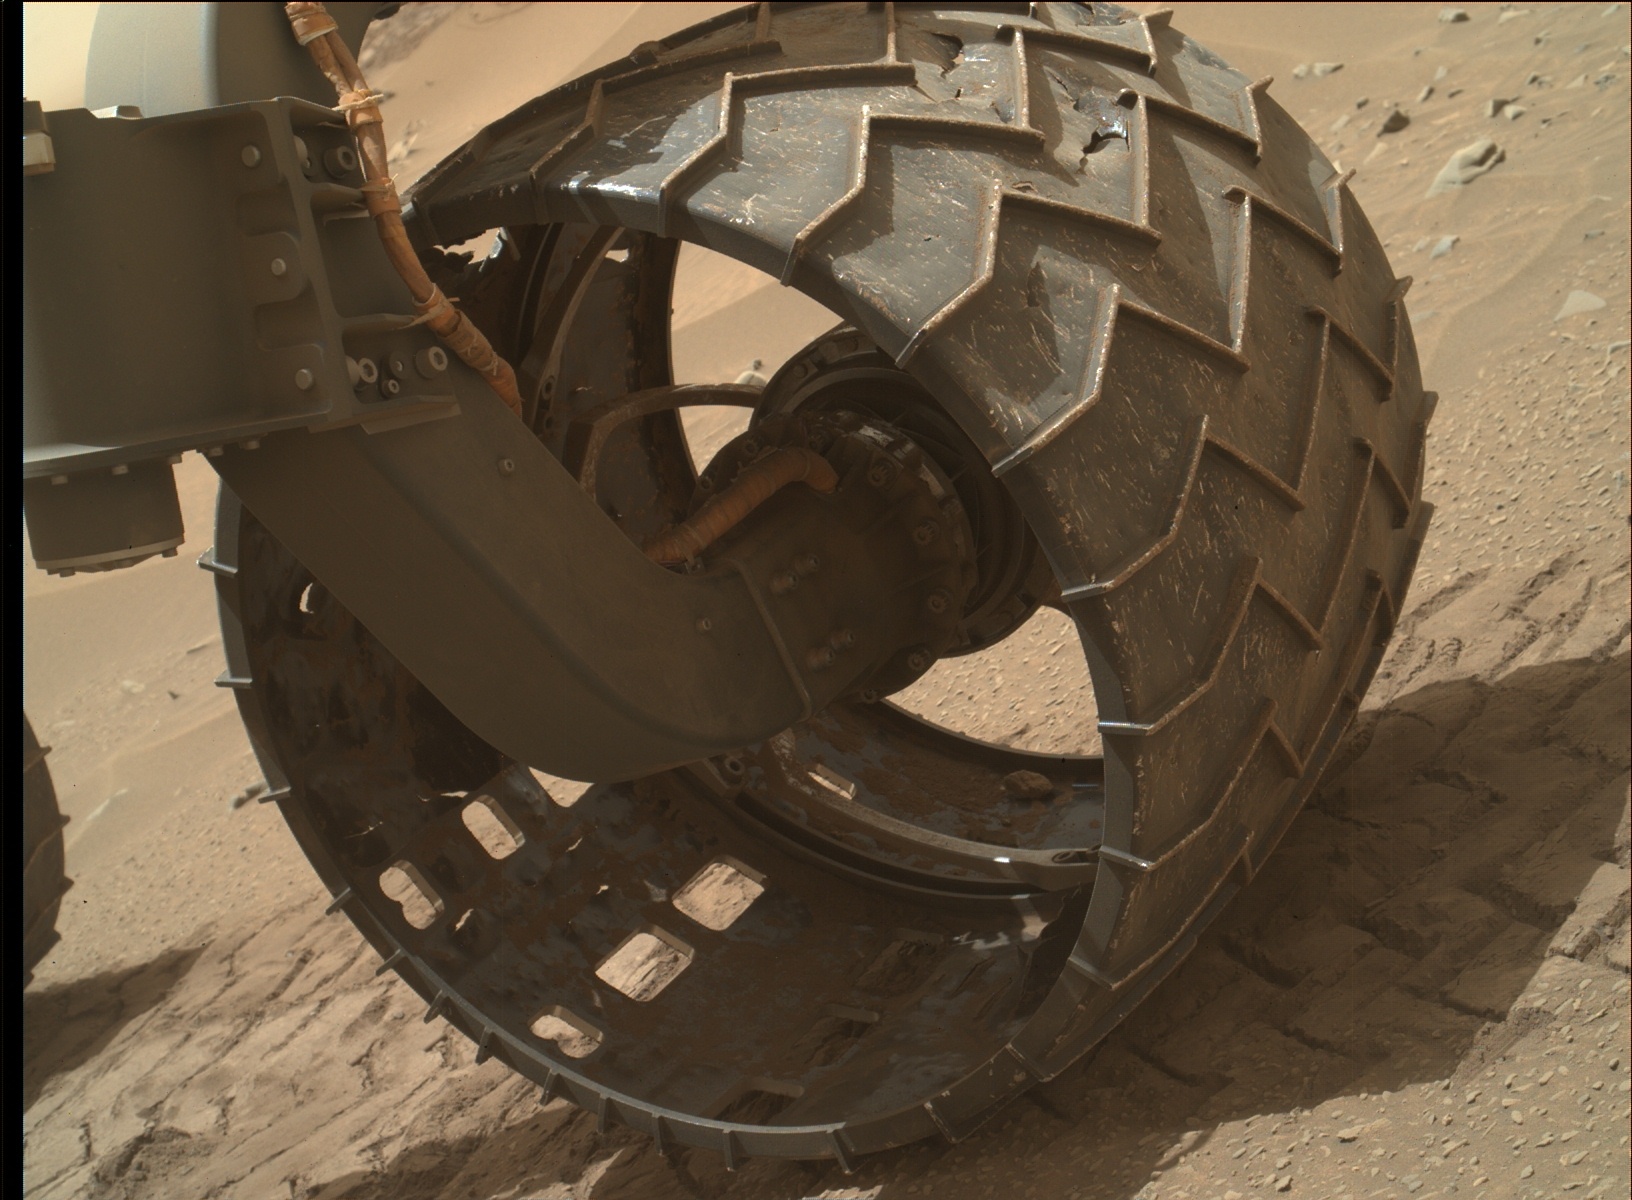 Nasa's Mars rover Curiosity acquired this image using its Mars Hand Lens Imager (MAHLI) on Sol 1046